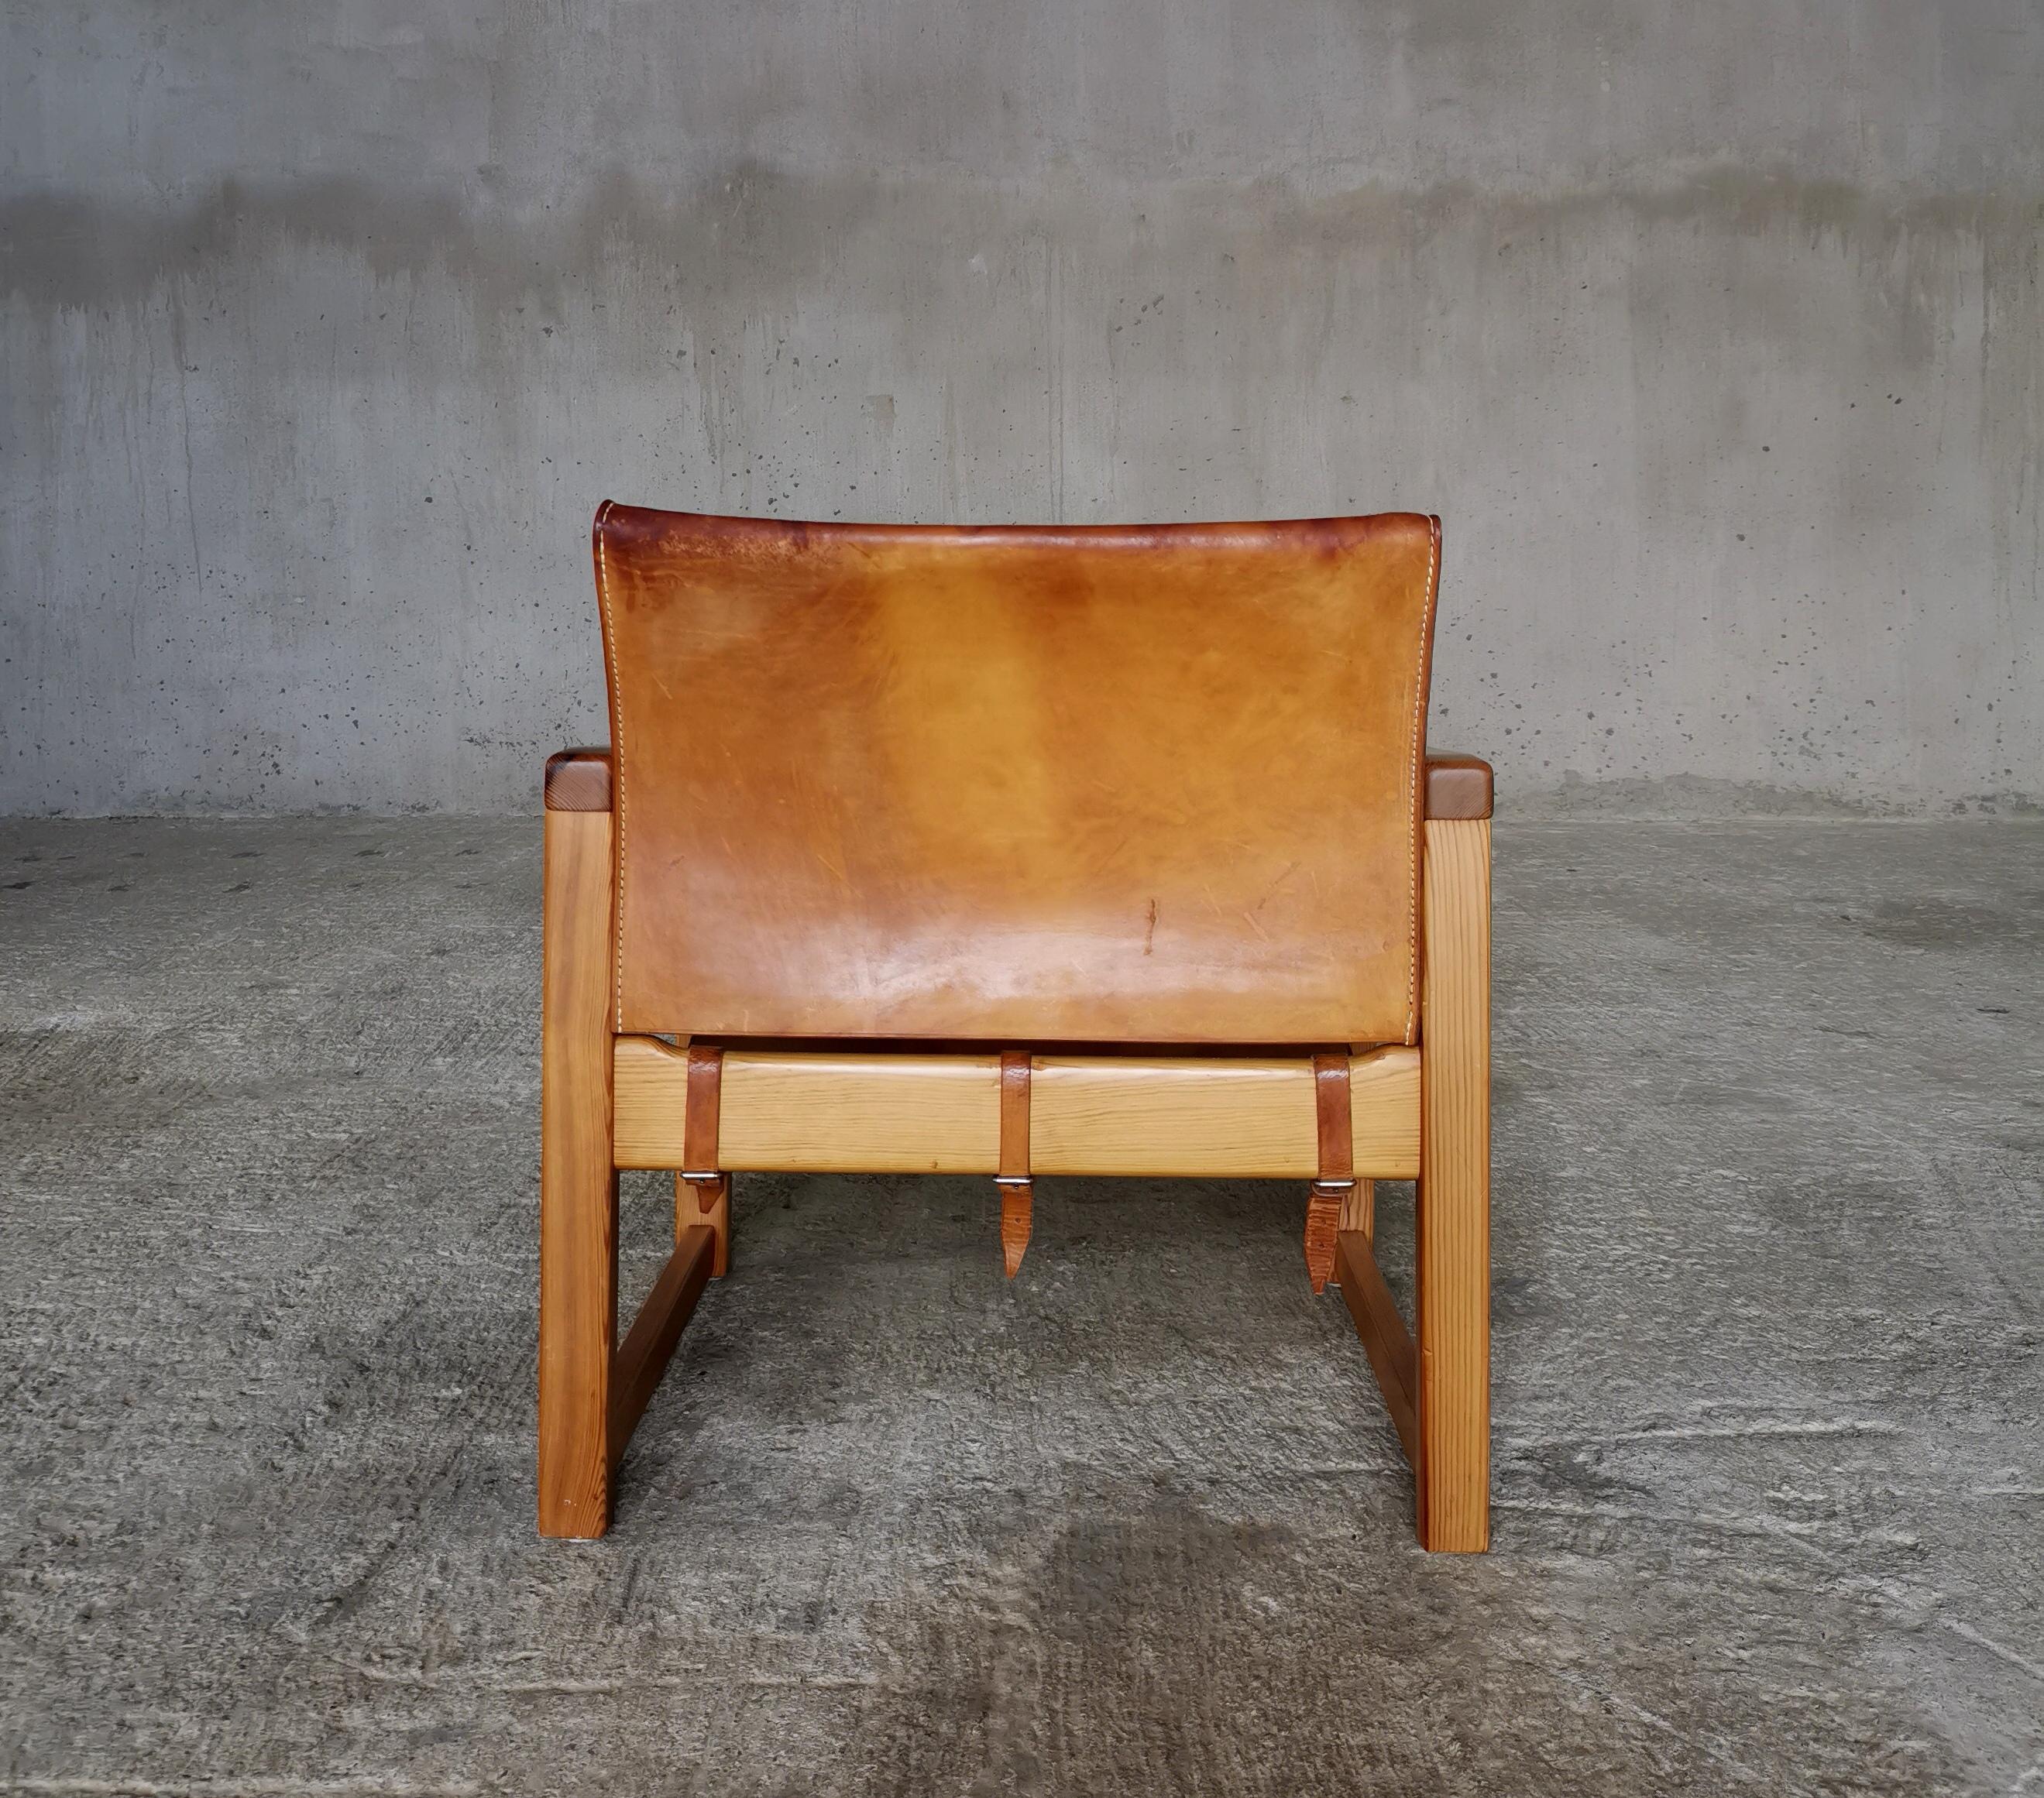 Scandinavian Modern Diana lounge chair by Karin Mobring for Ikea Sweden 1970s, thick cognac leather. For Sale